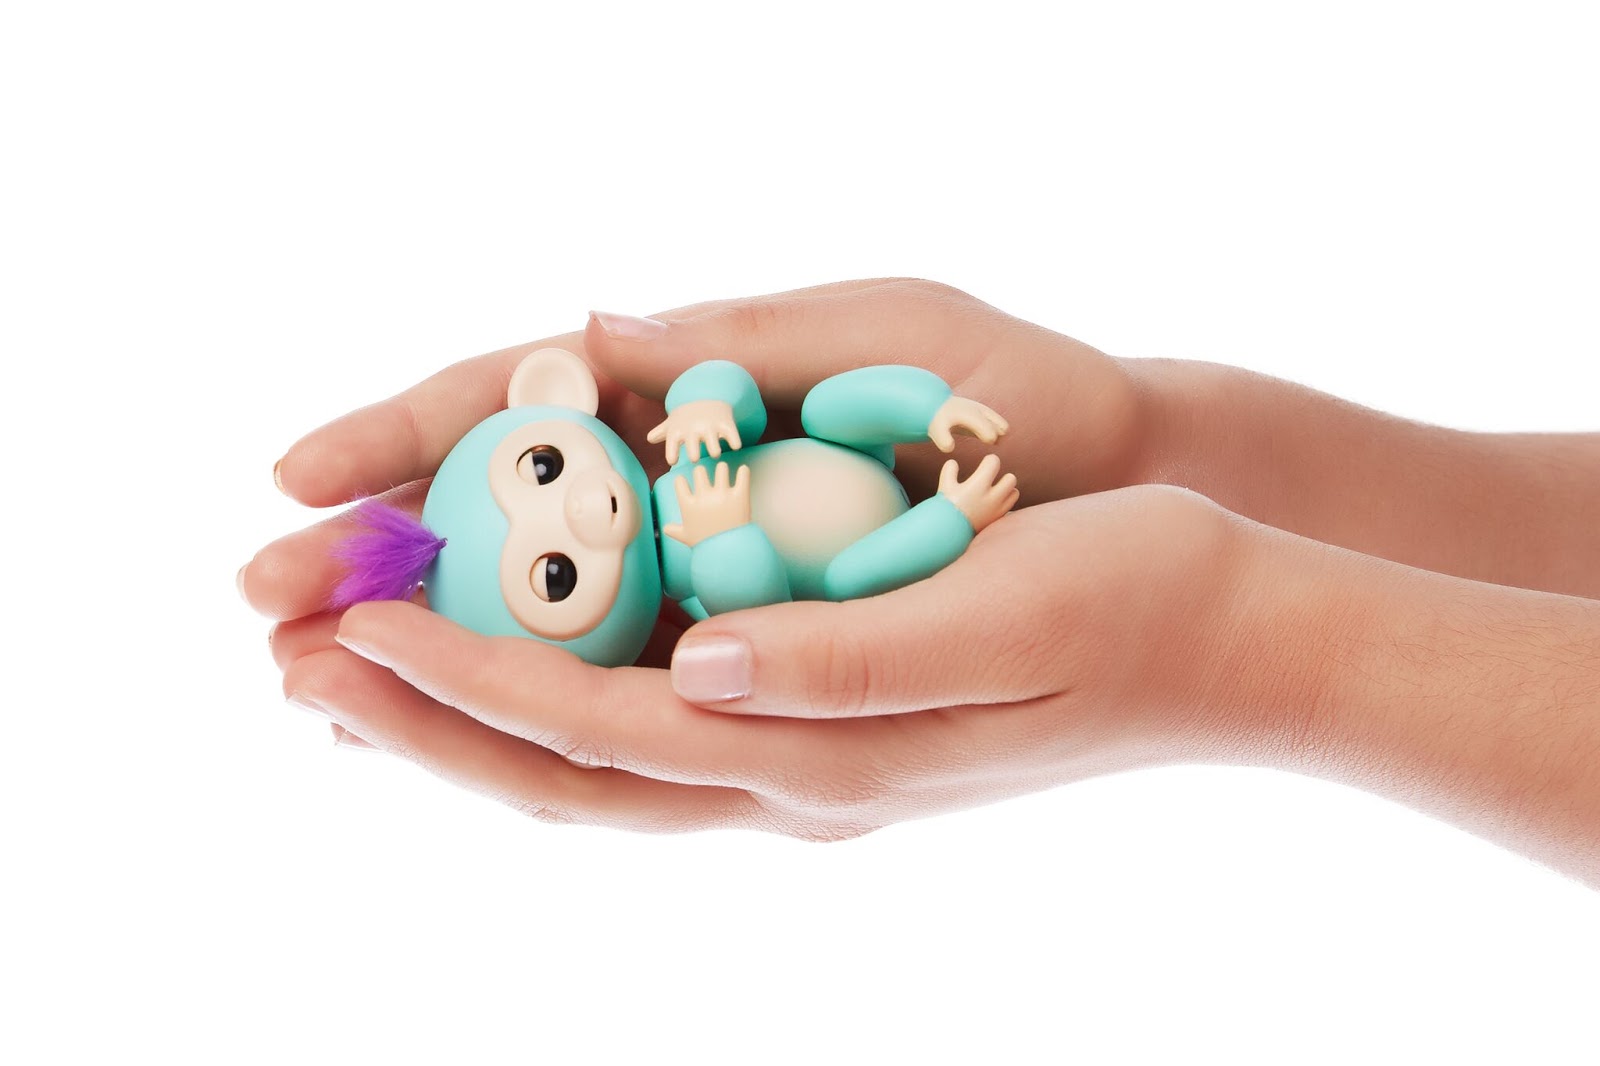 1. Fingerlings - Interactive Baby Monkey - Bella (Pink with Yellow Hair) - wide 6